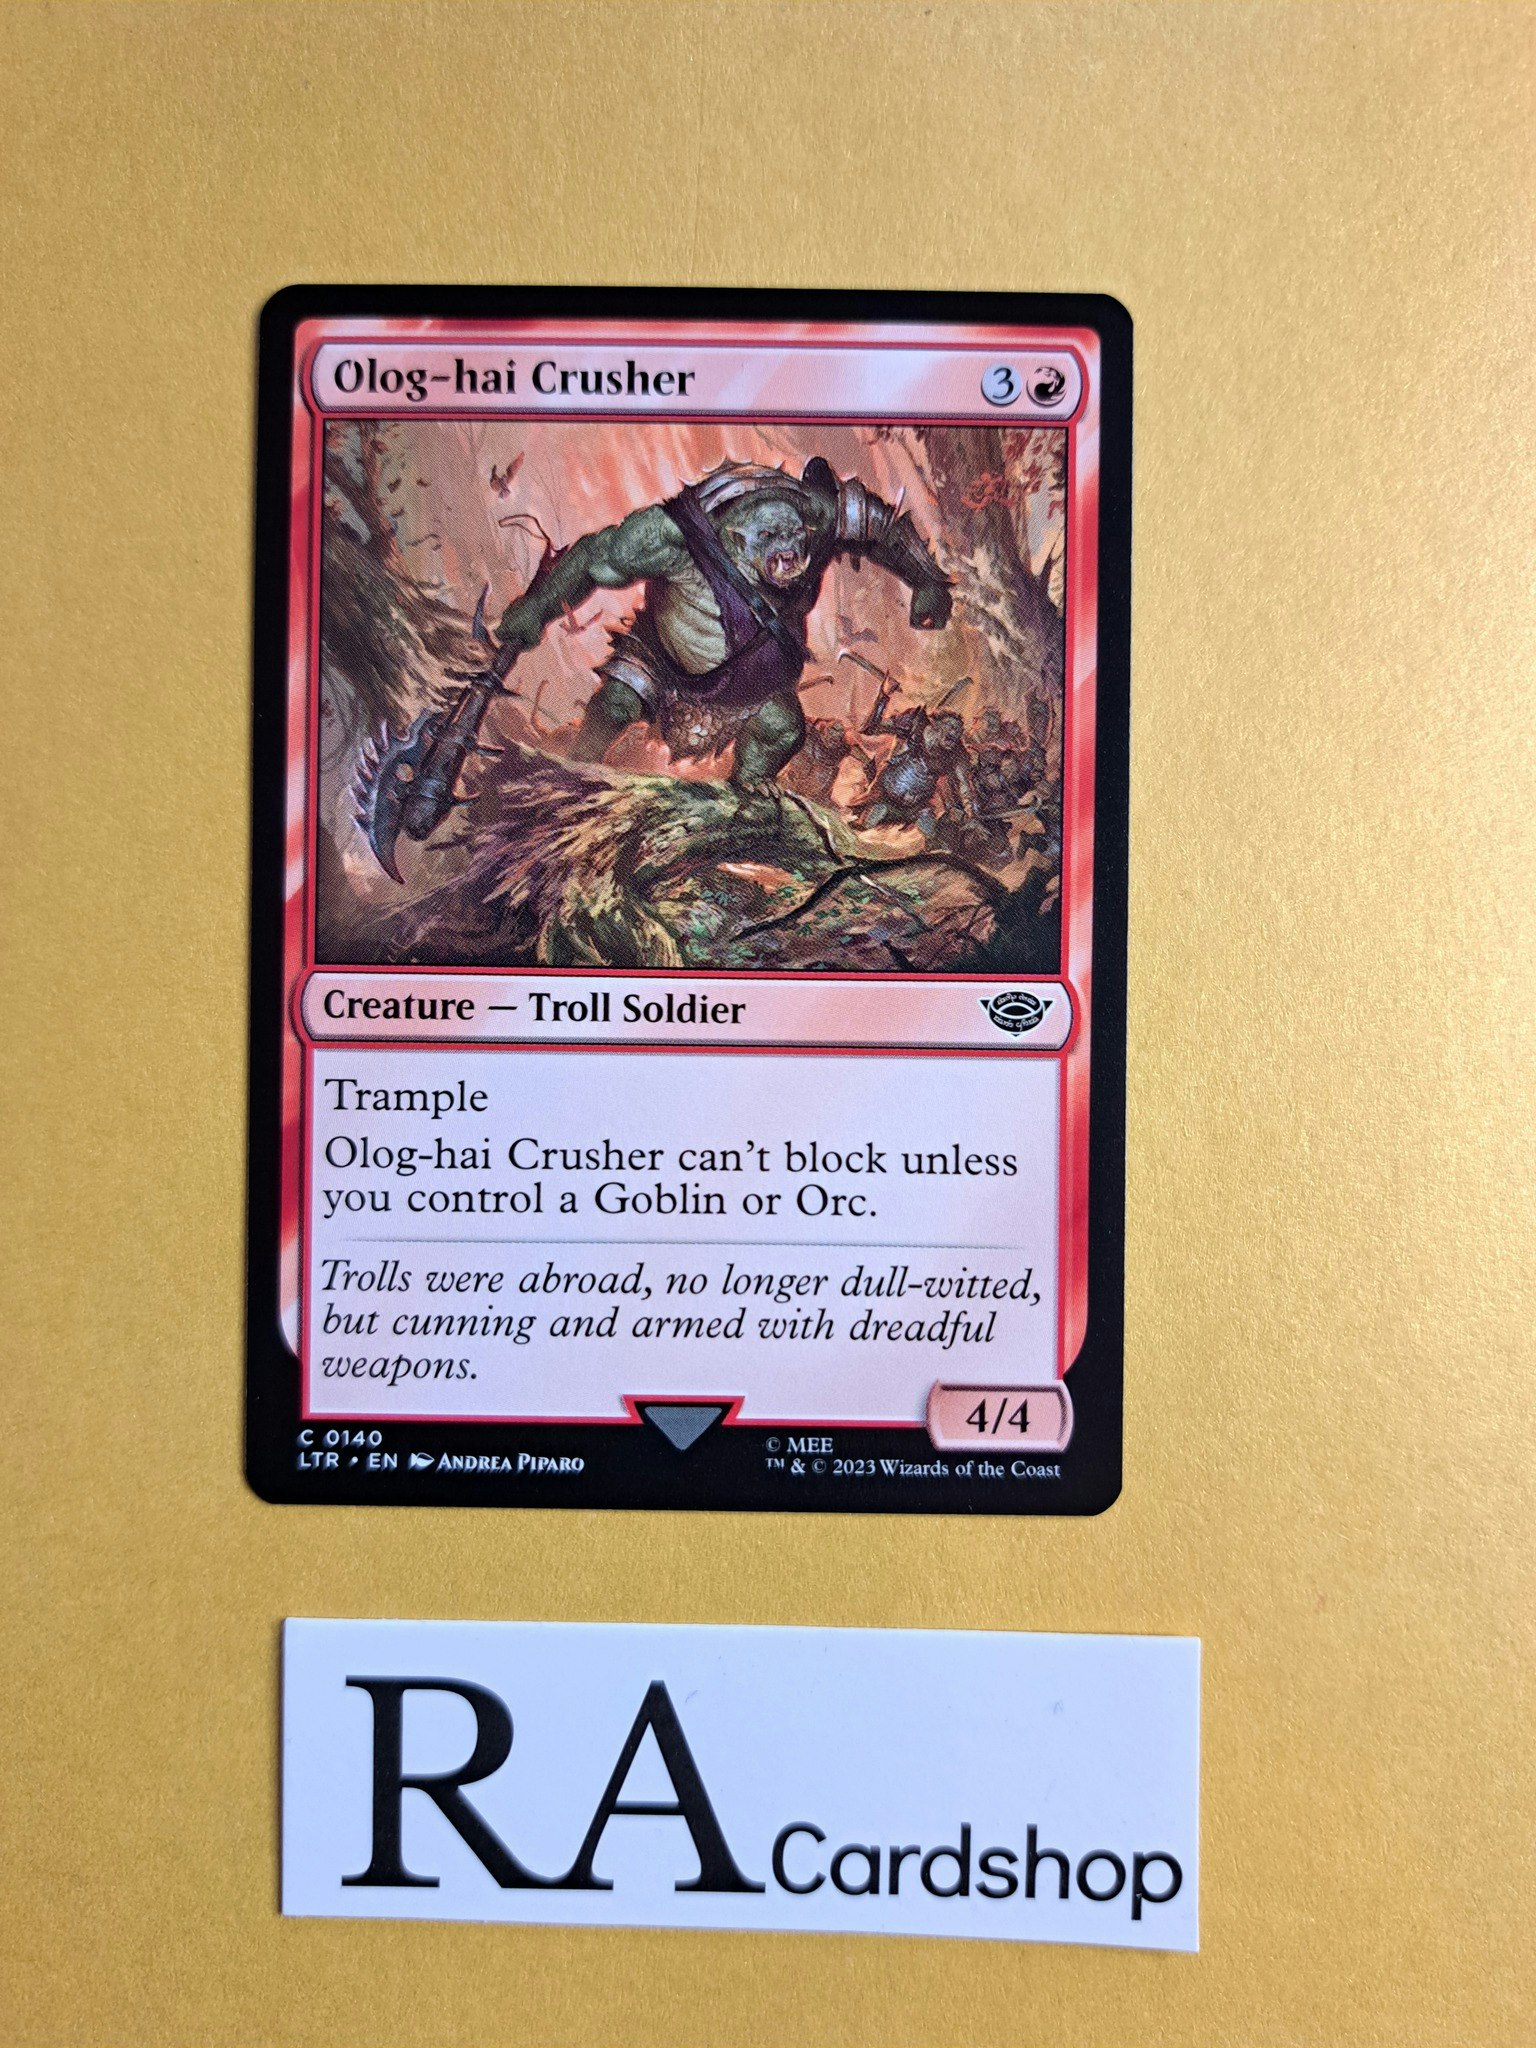 Olog-hai Crusher Common 140 The Lord of the Rings Tales of Middle-earth (LTR) Magic the Gathering